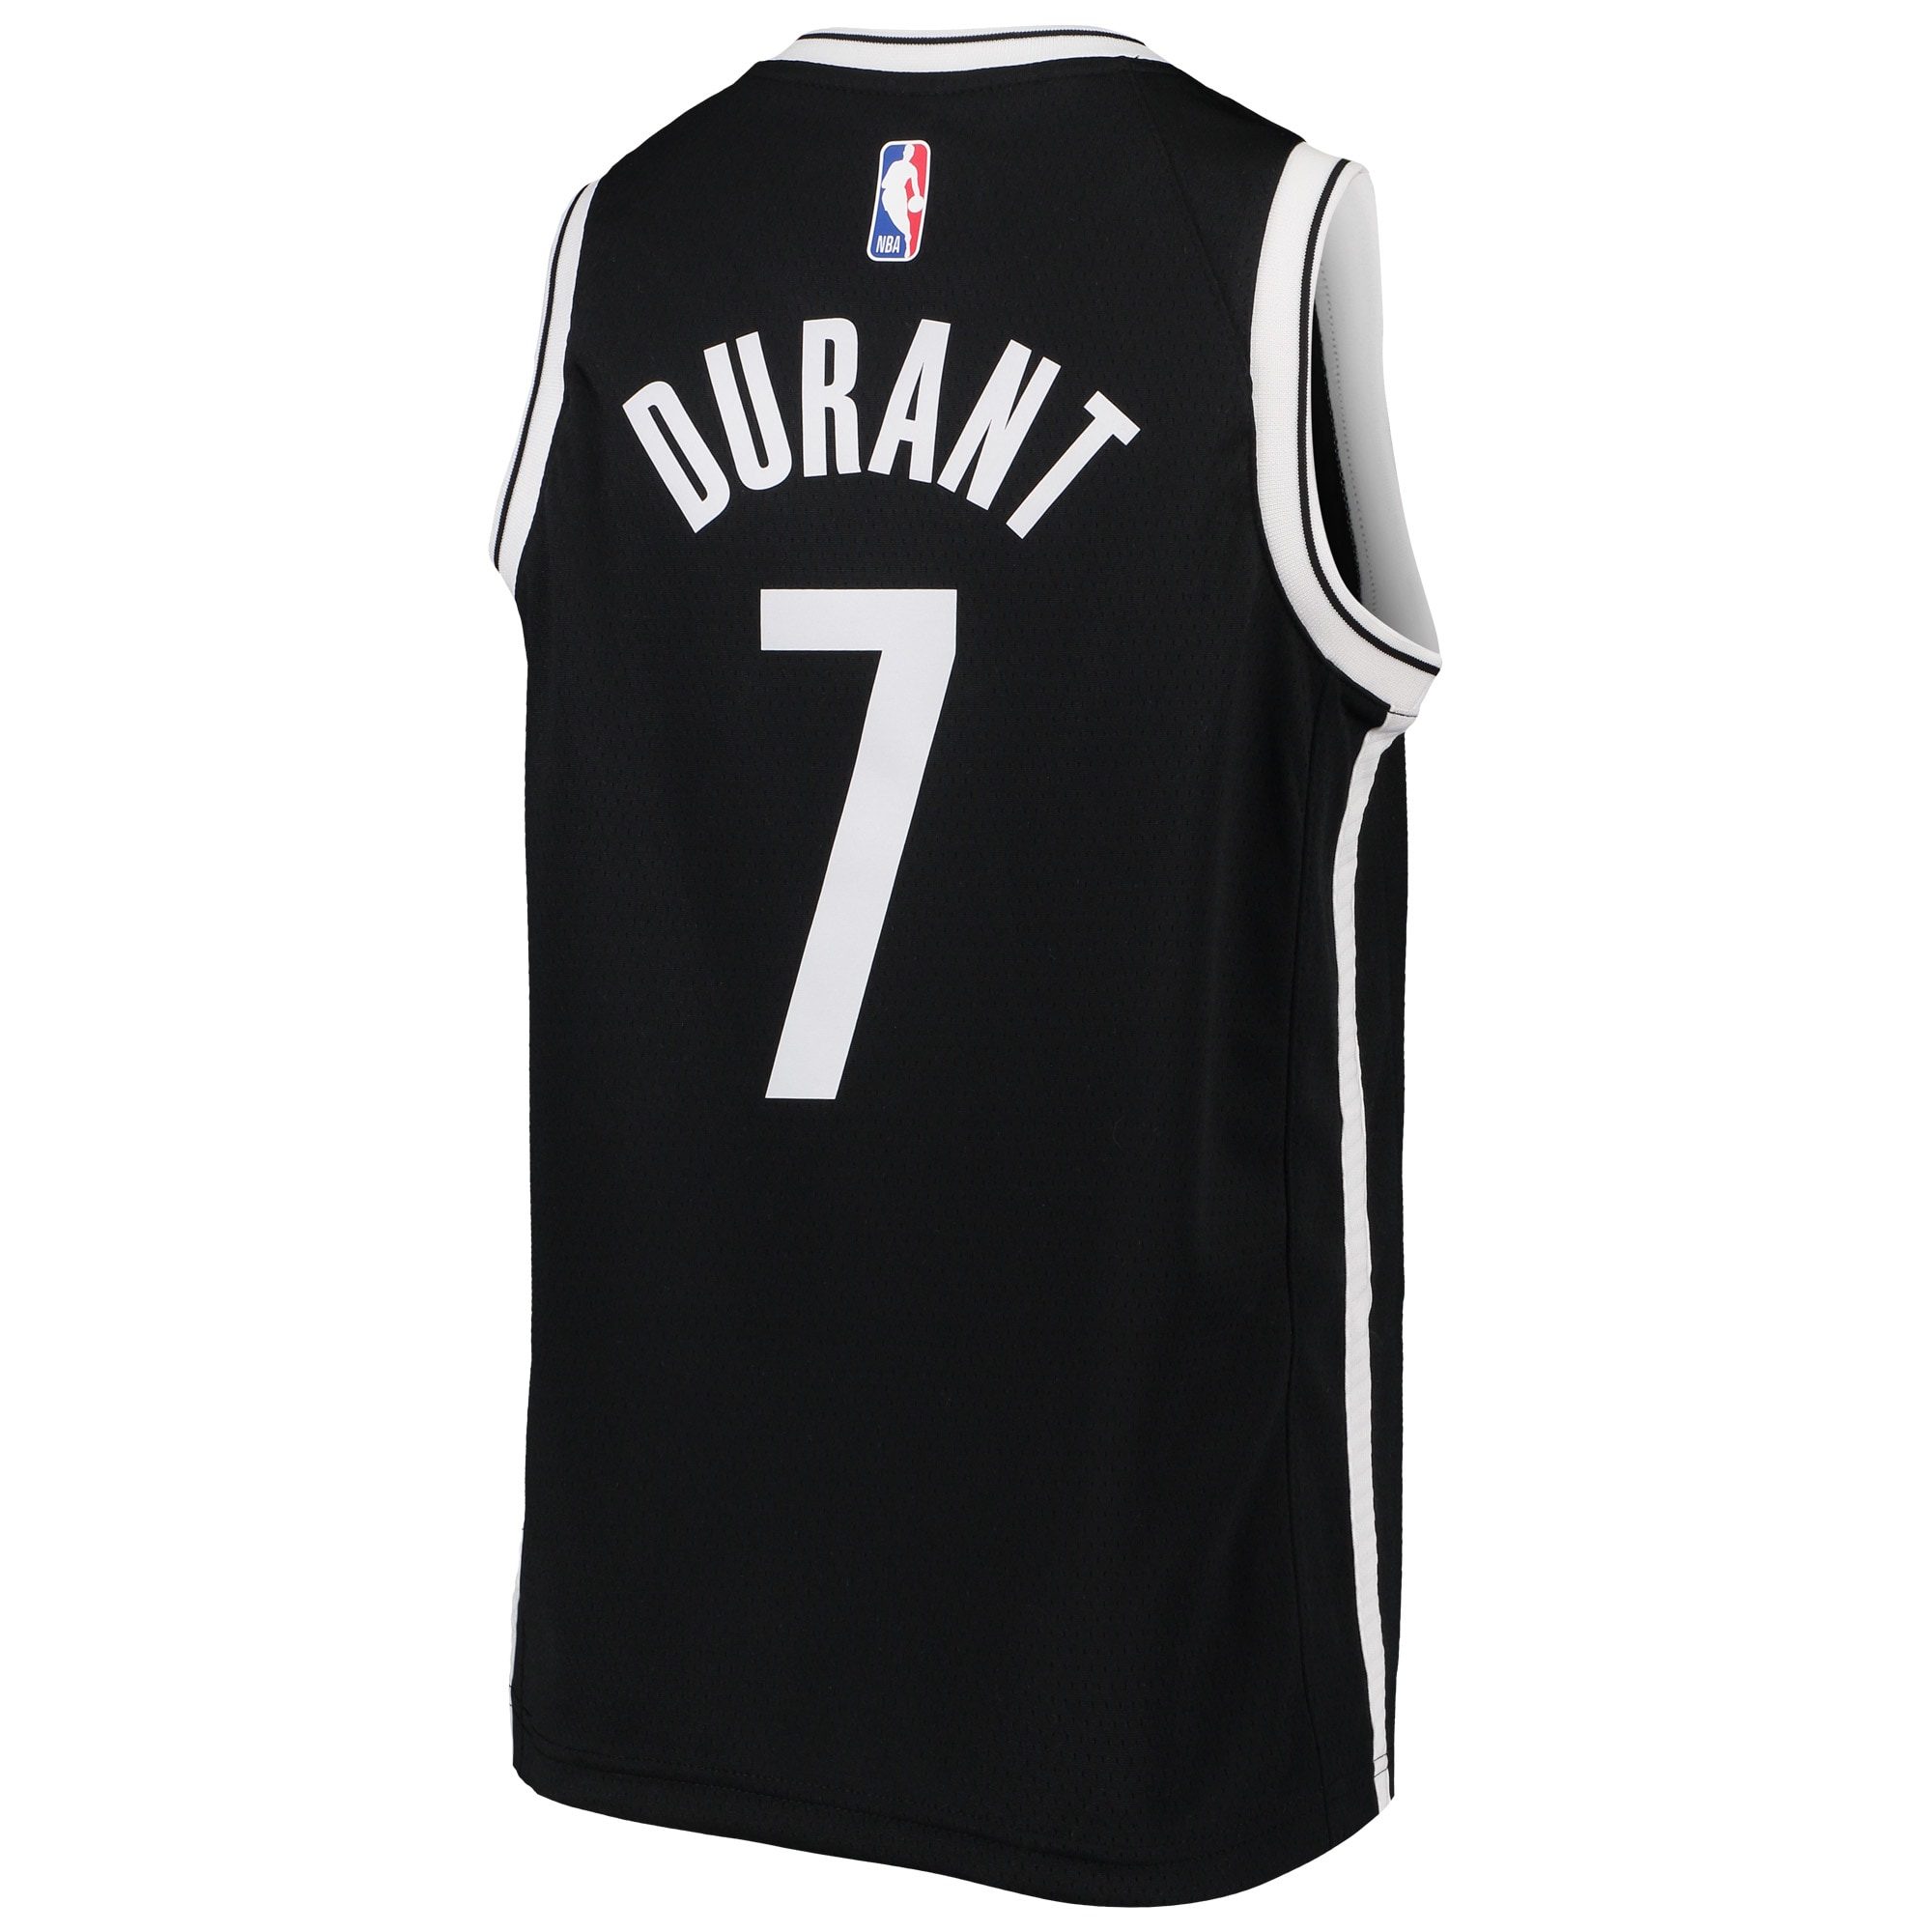 Youth Nike Kevin Durant Black Brooklyn Nets Swingman Jersey - Icon Edition - image 3 of 3